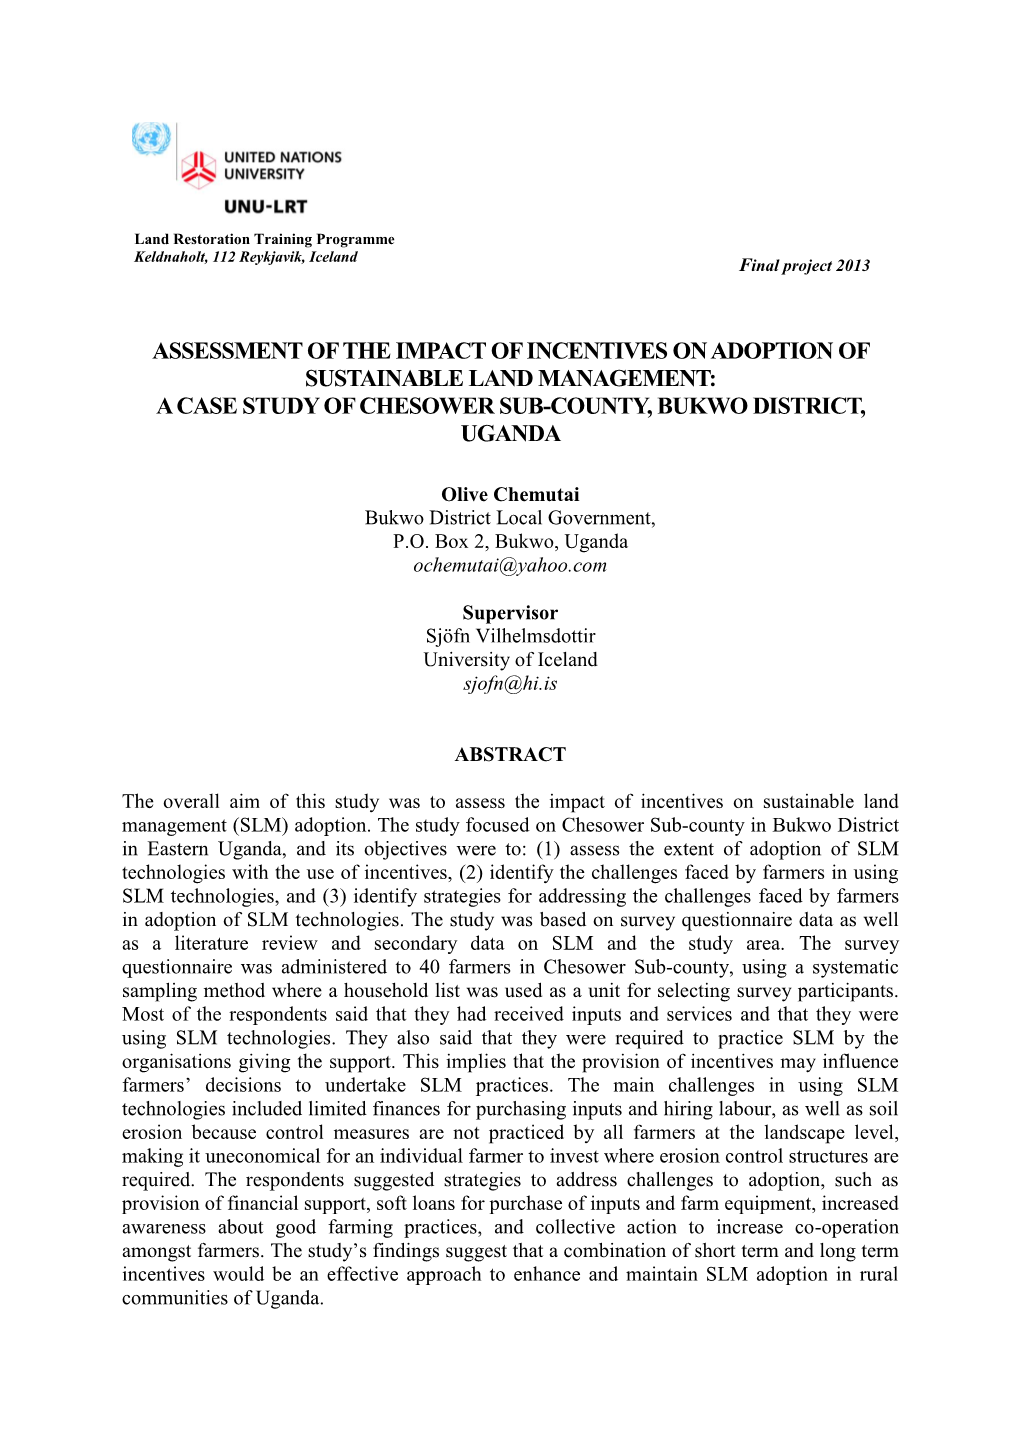 Assessment of the Impact of Incentives on Adoption of Sustainable Land Management: a Case Study of Chesower Sub-County, Bukwo District, Uganda